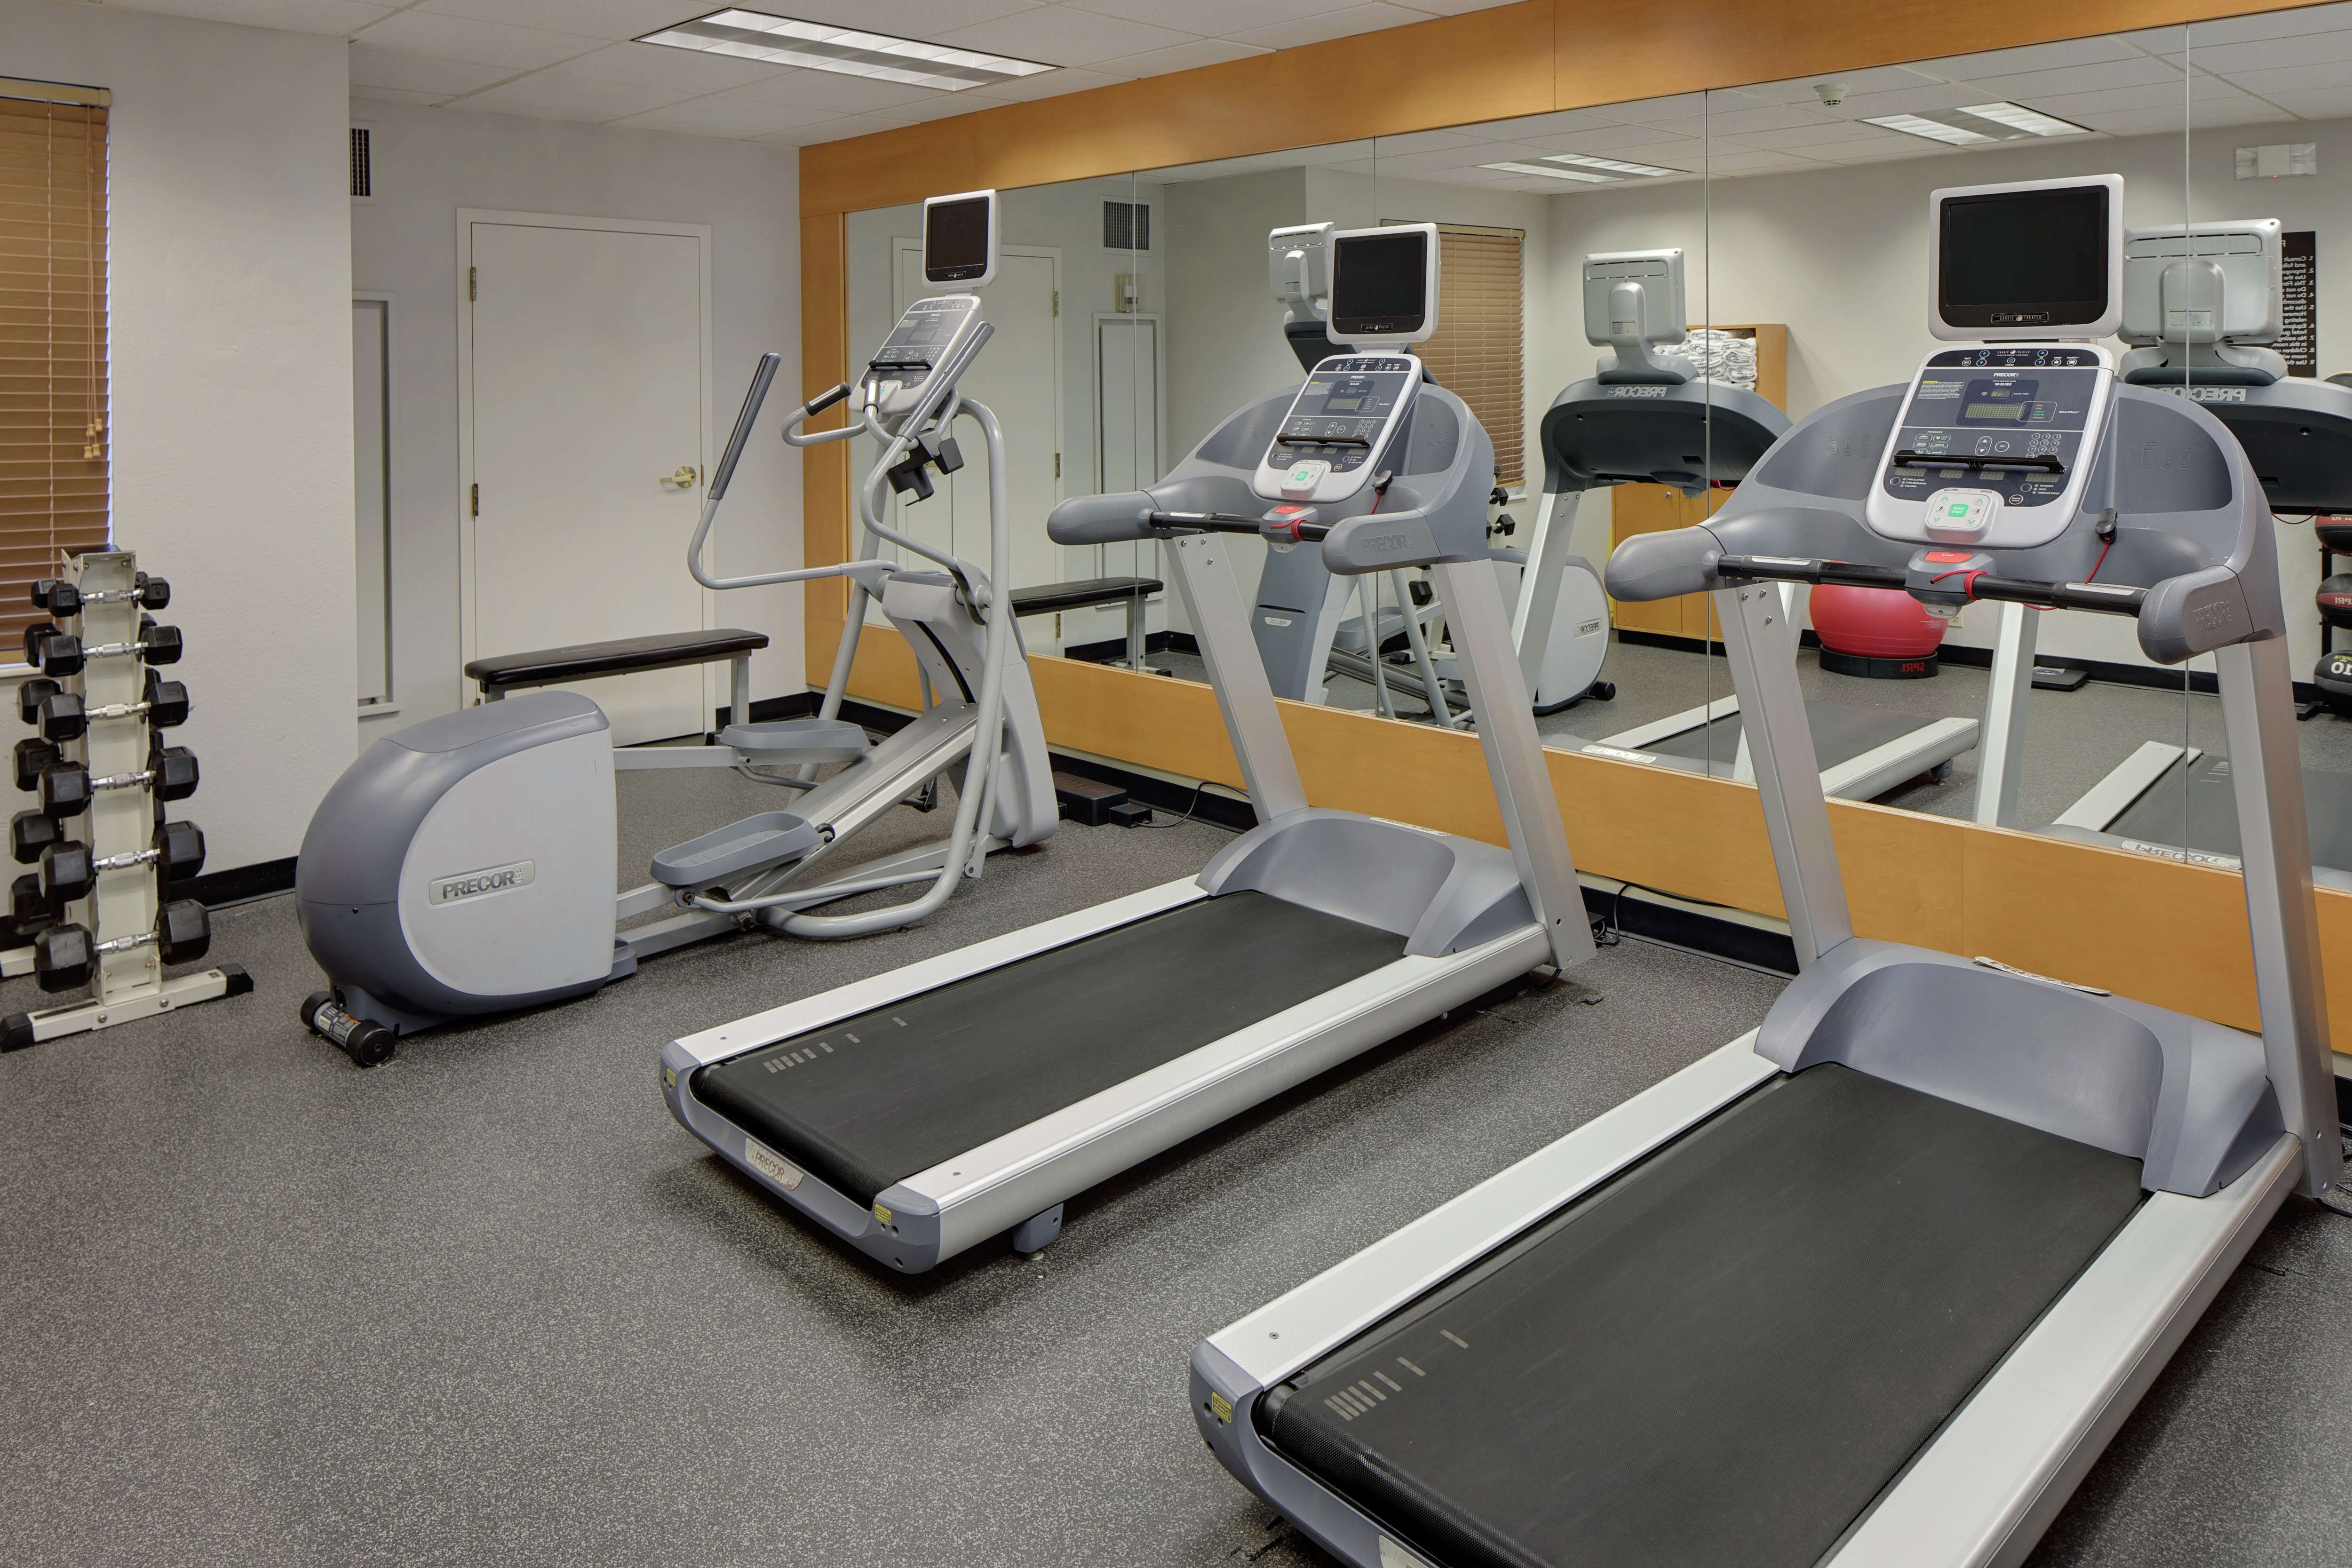 Cardio Machines and Mirror in Fitness Center